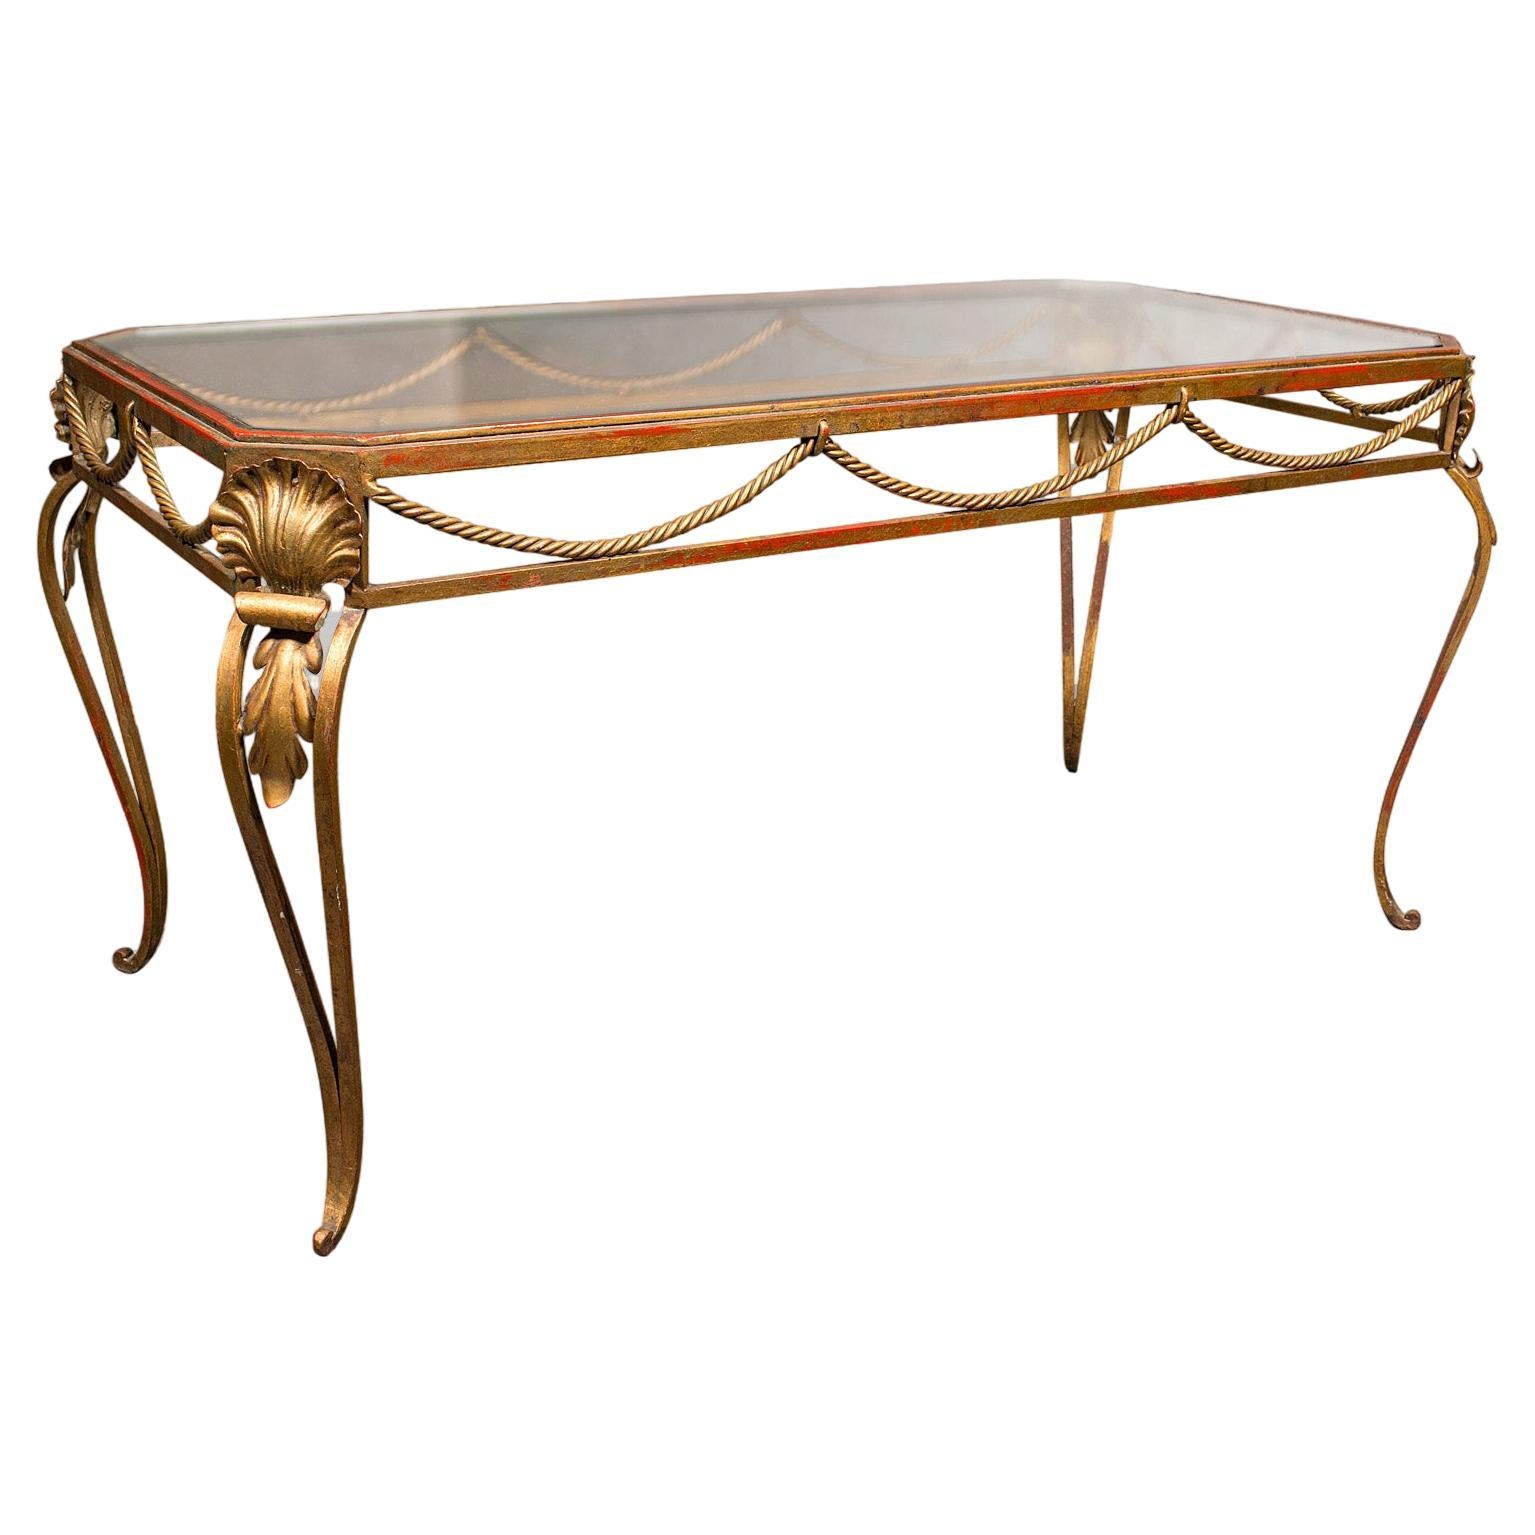 Antique Glazed Coffee Table, French, Brass, Art Nouveau, Early 20th, Circa 1920 For Sale